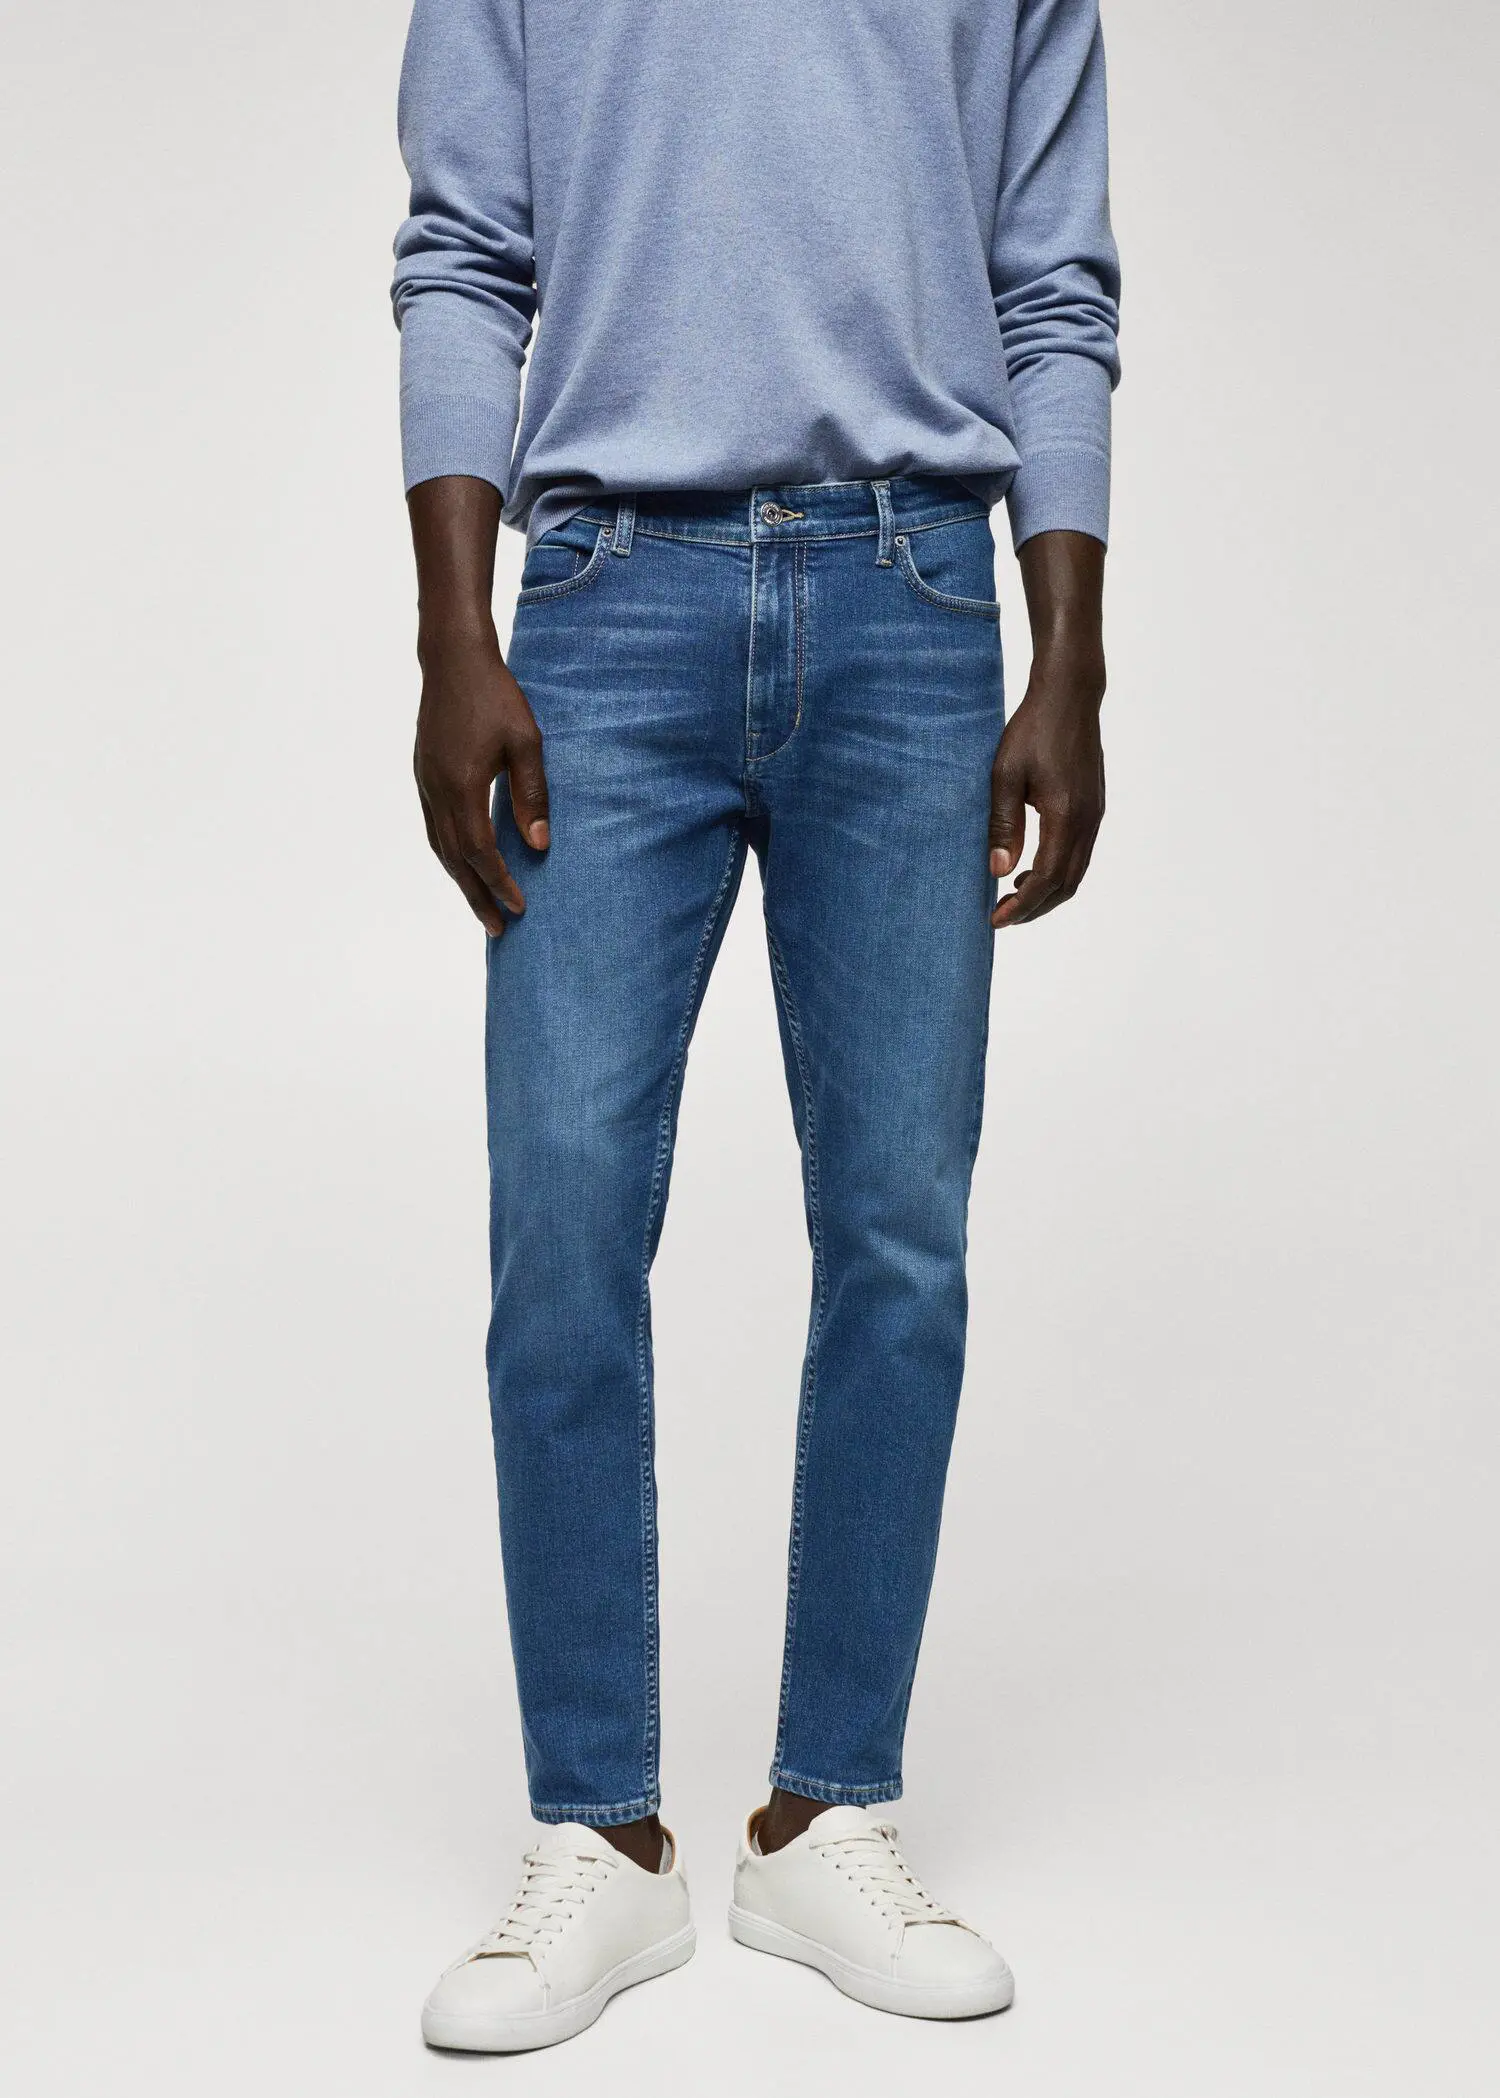 Mango Tom tapered cropped jeans. 2